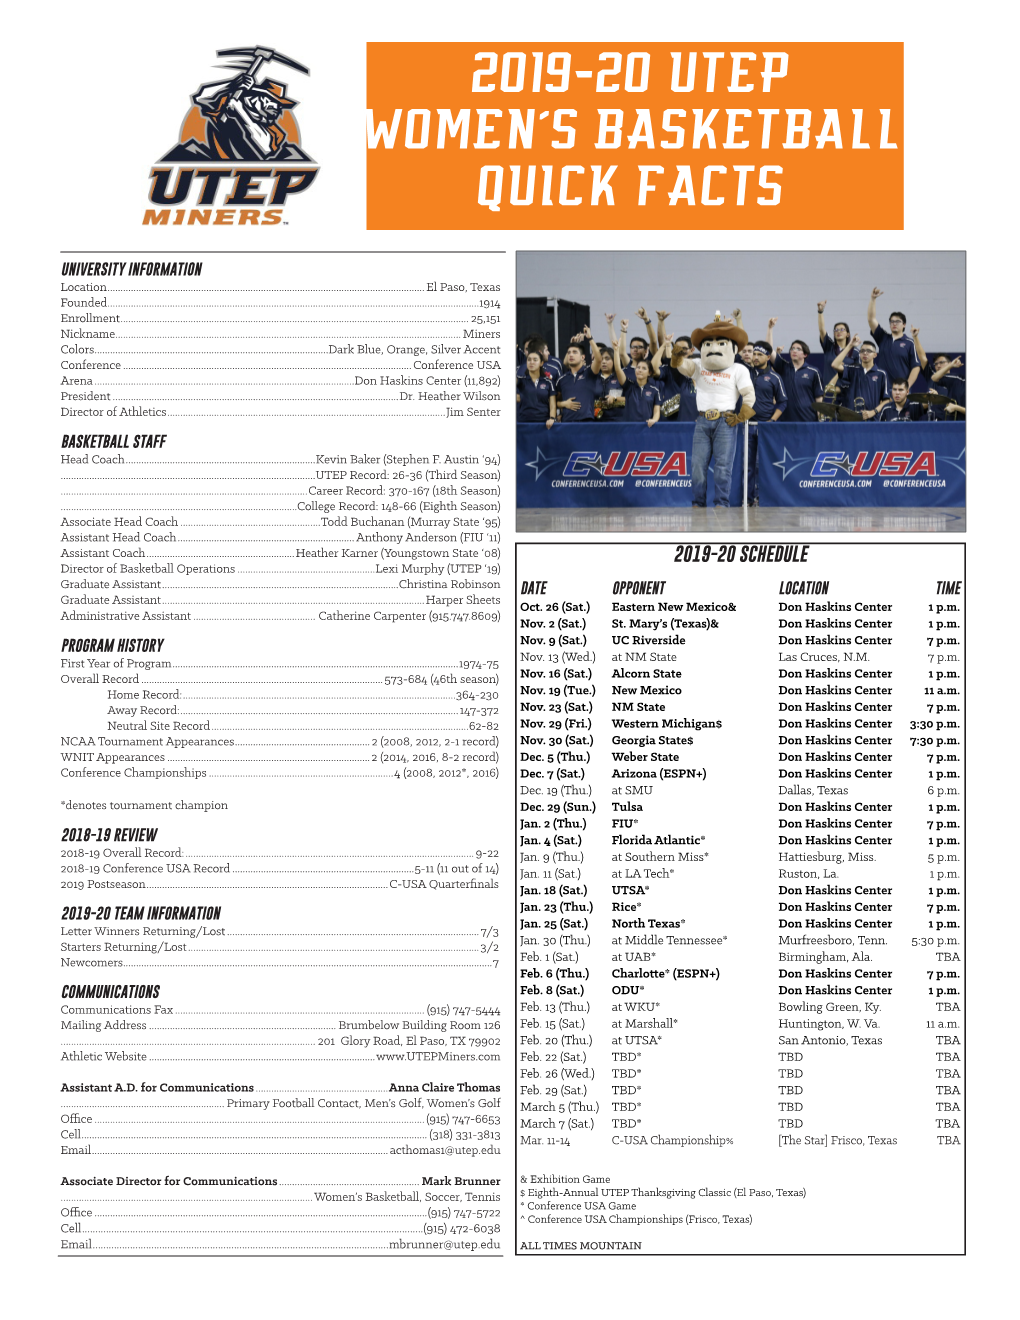 2019-20 Utep Women's Basketball Quick Facts